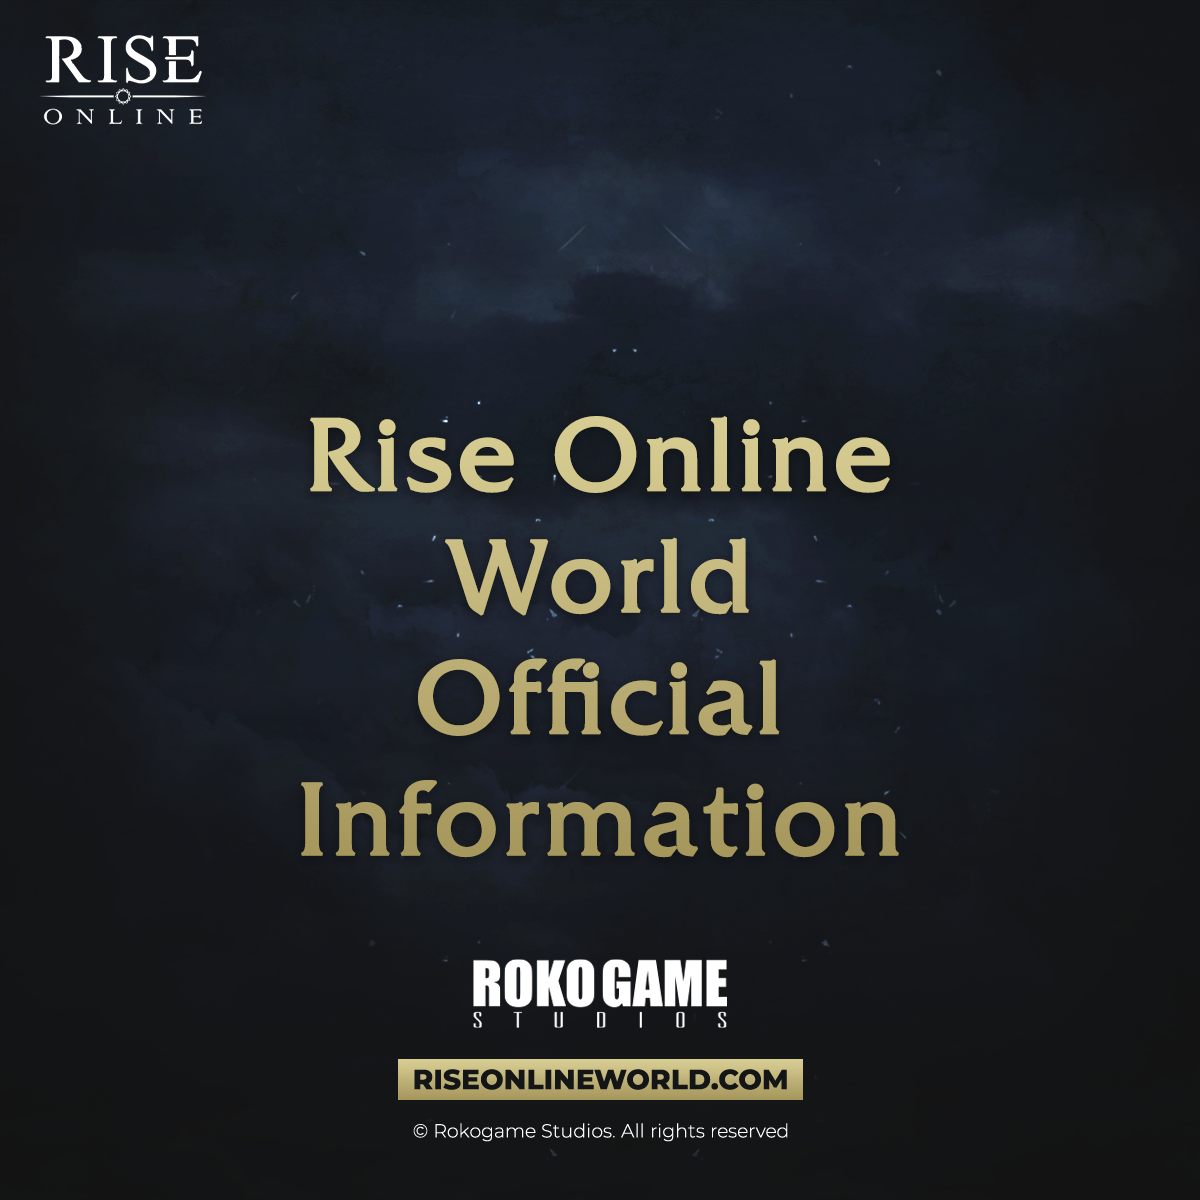 Rise Online World Official Information